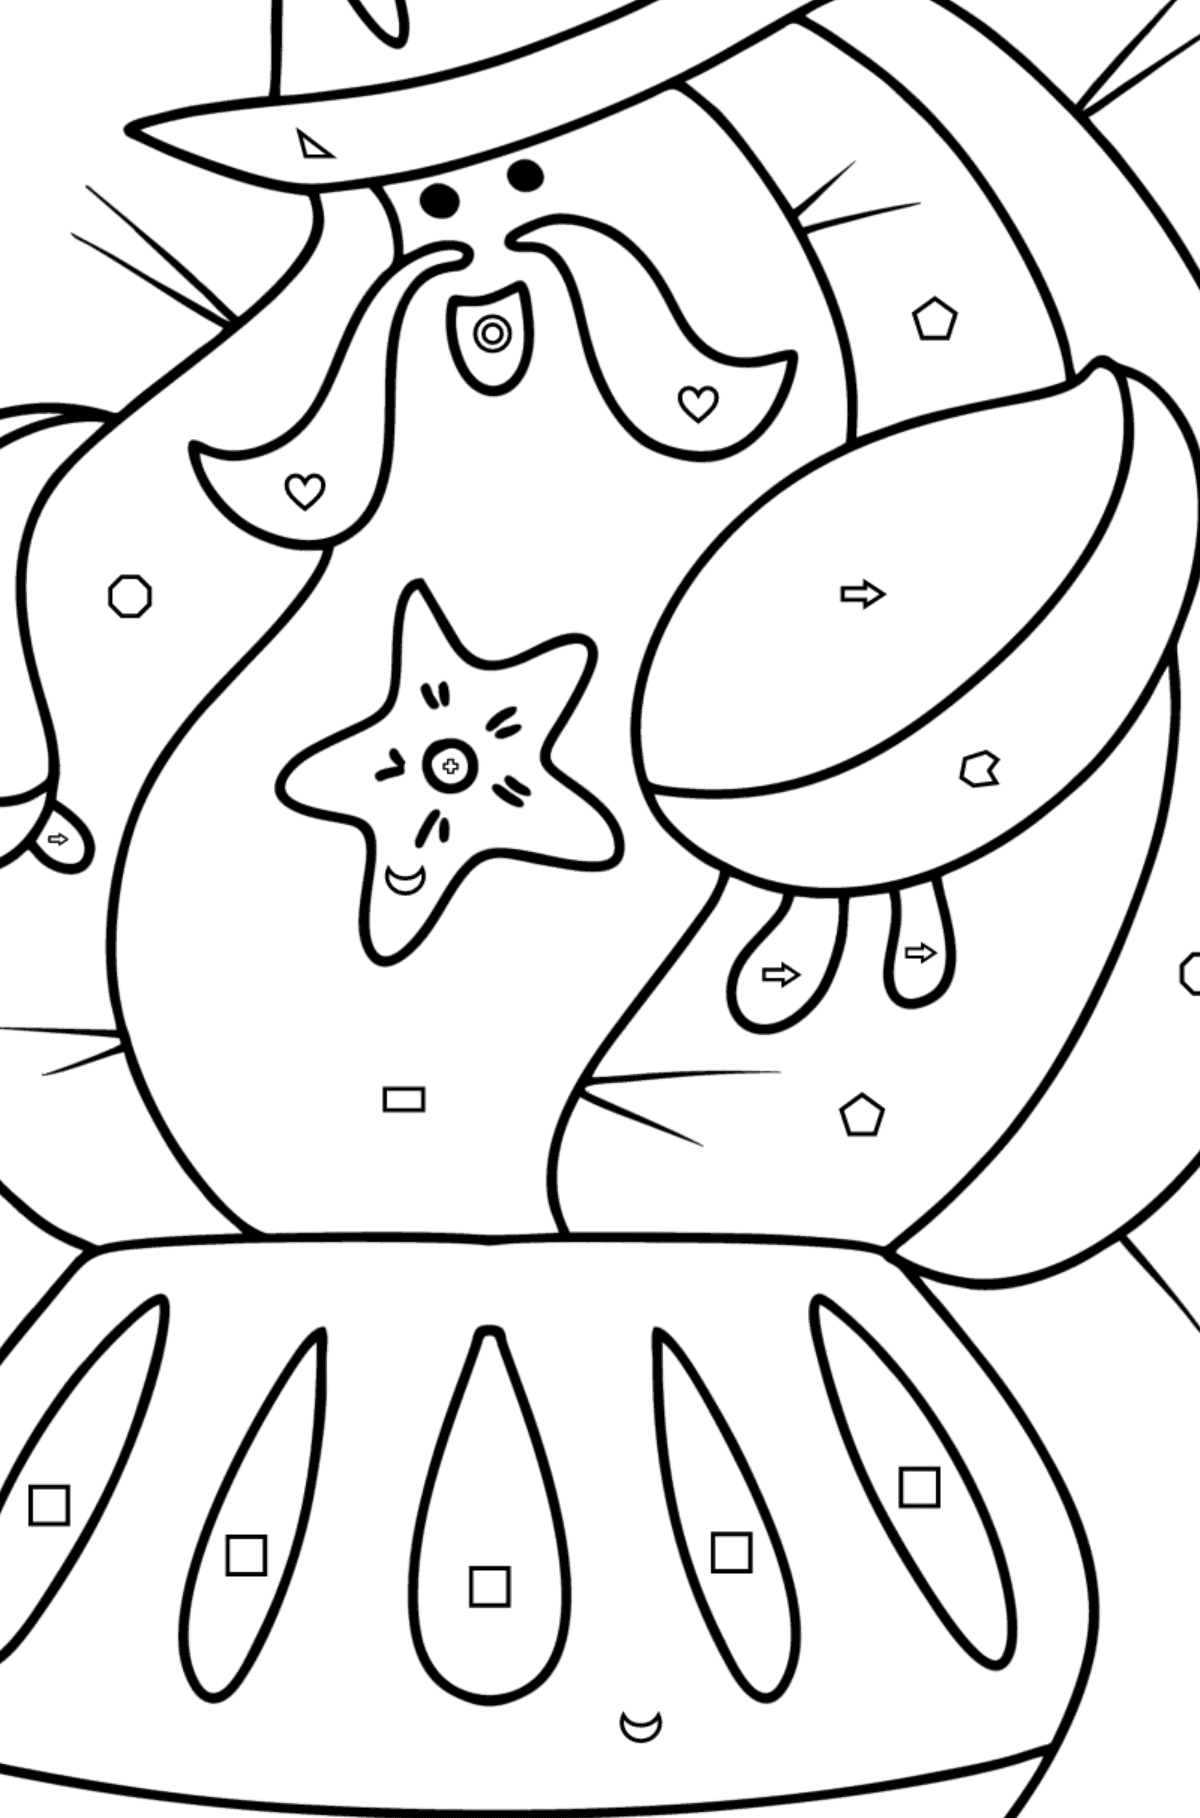 Sheriff Cactus coloring page - Coloring by Geometric Shapes for Kids